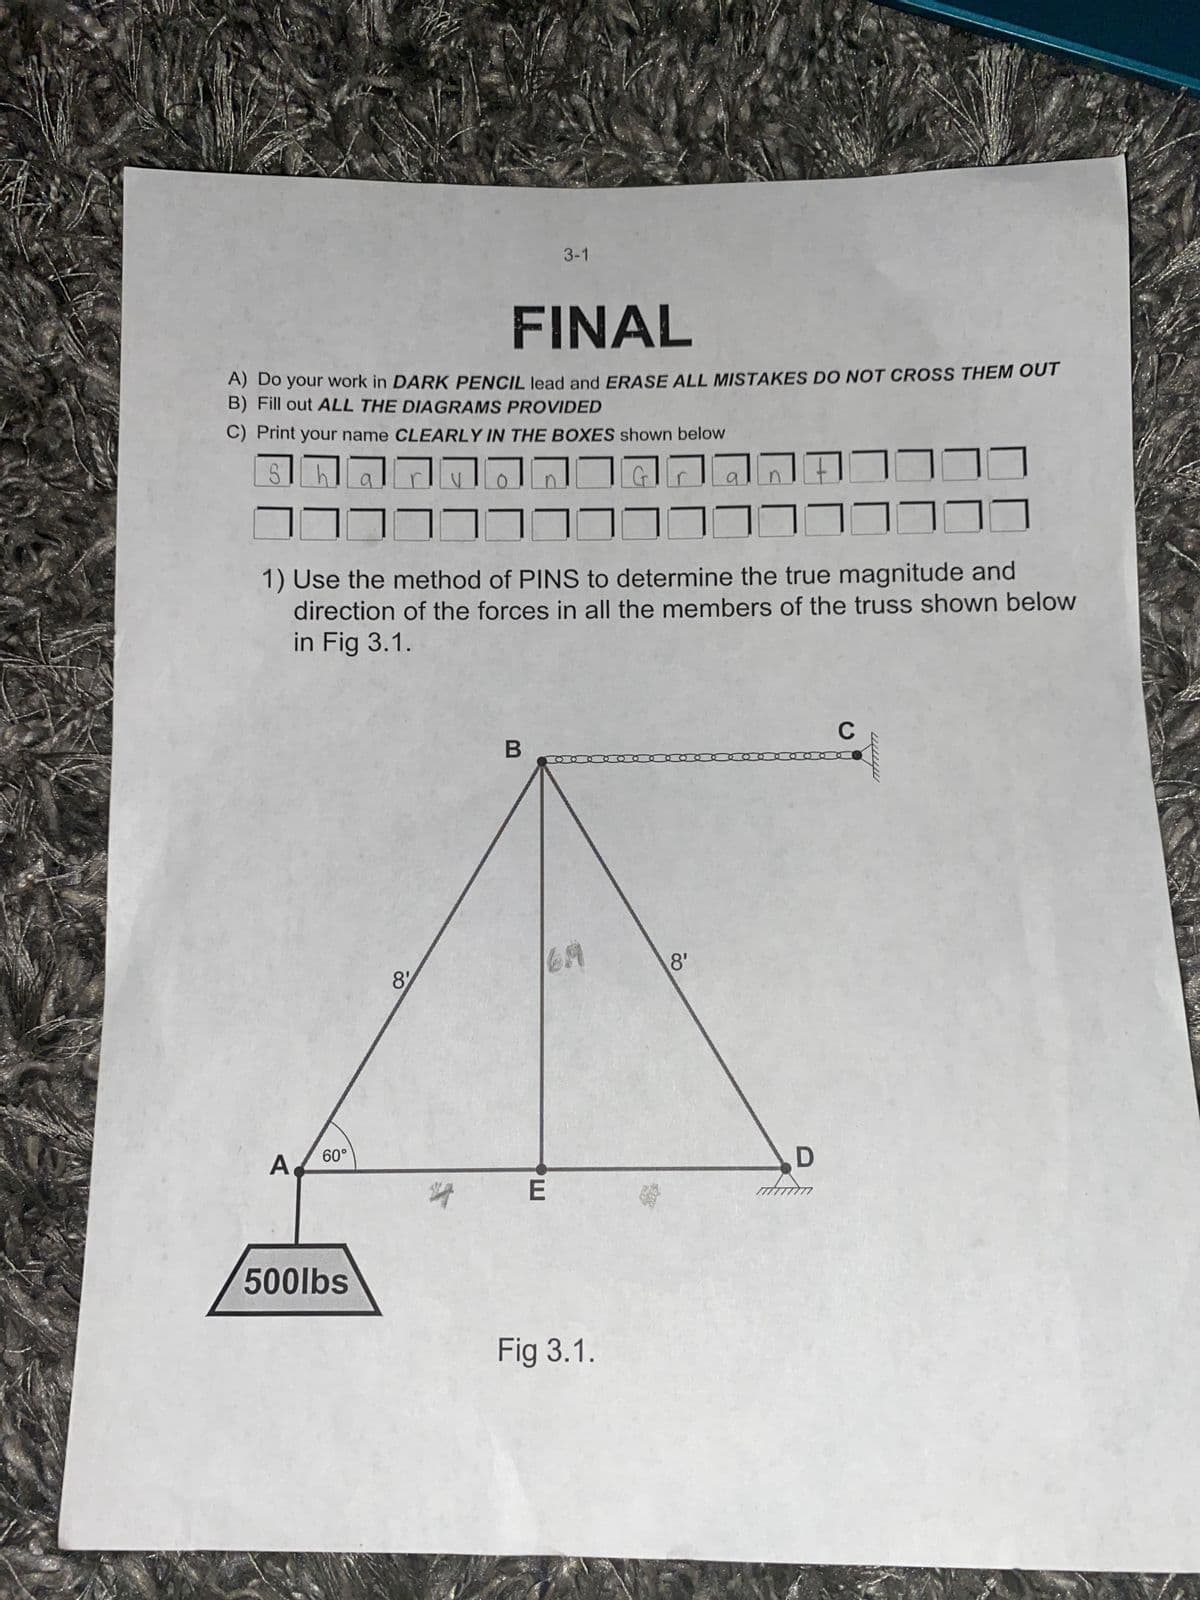 FINAL
A) Do your work in DARK PENCIL lead and ERASE ALL MISTAKES DO NOT CROSS THEM OUT
B) Fill out ALL THE DIAGRAMS PROVIDED
C) Print your name CLEARLY IN THE BOXES shown below
רררר-------רררררר
-----------------
A
a
1) Use the method of PINS to determine the true magnitude and
direction of the forces in all the members of the truss shown below
in Fig 3.1.
60°
3-1
500lbs
8'
B
E
Fig 3.1.
8'
D
mmm
C